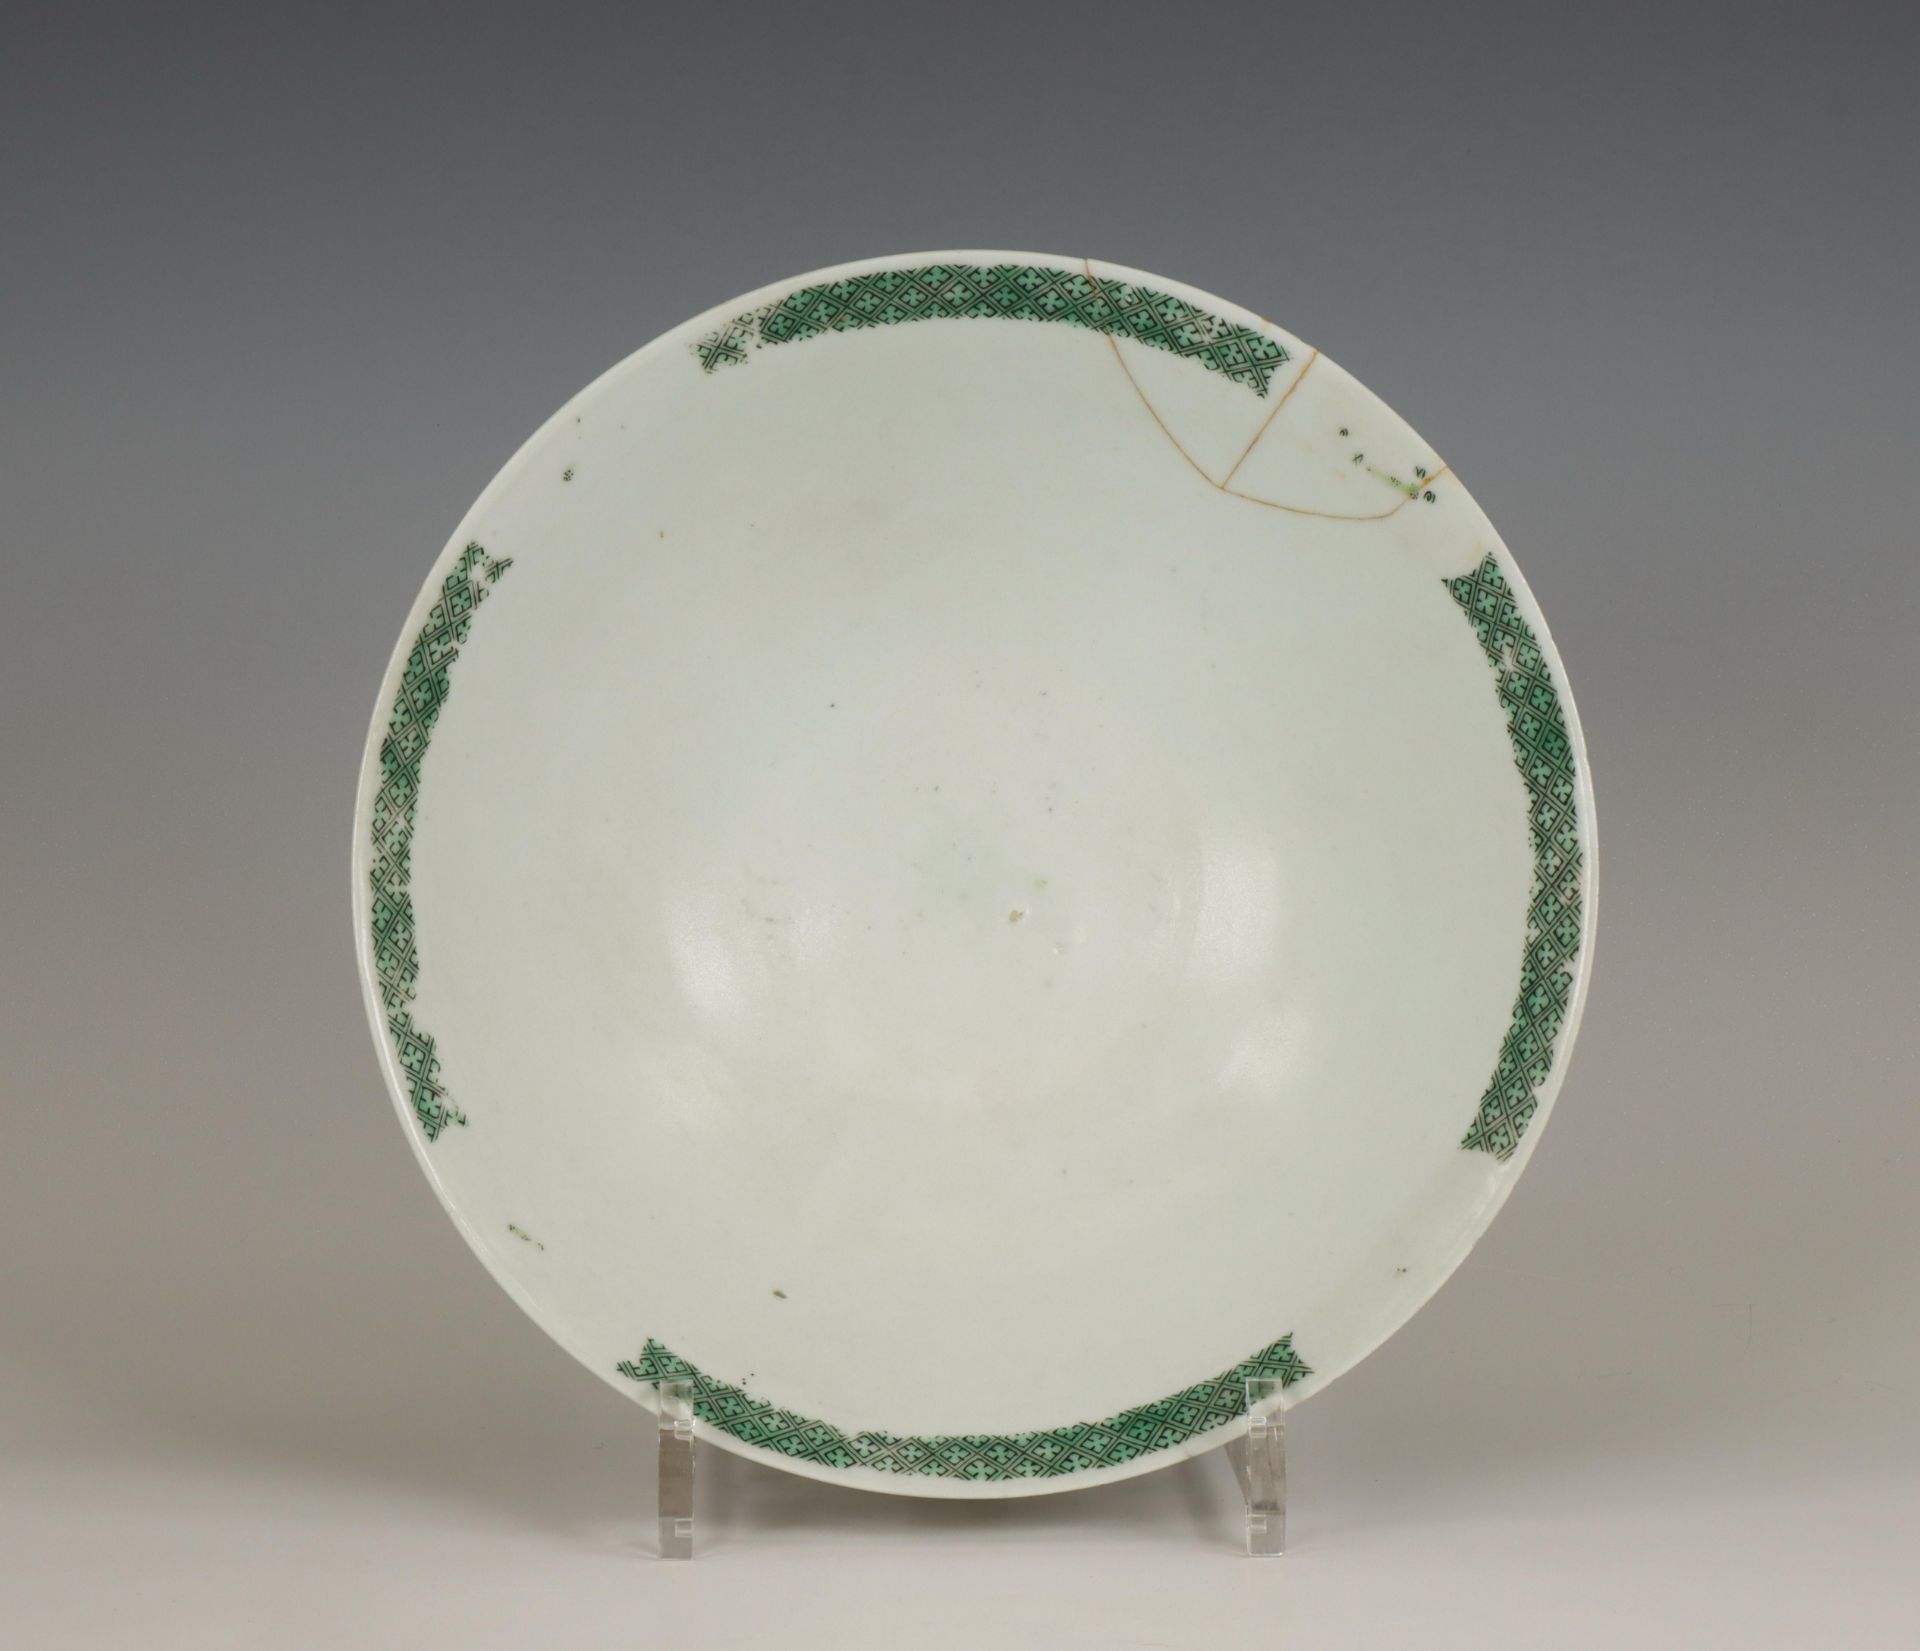 China, famille verte porcelain bowl, late Qing dynasty (1644-1912), - Image 3 of 3